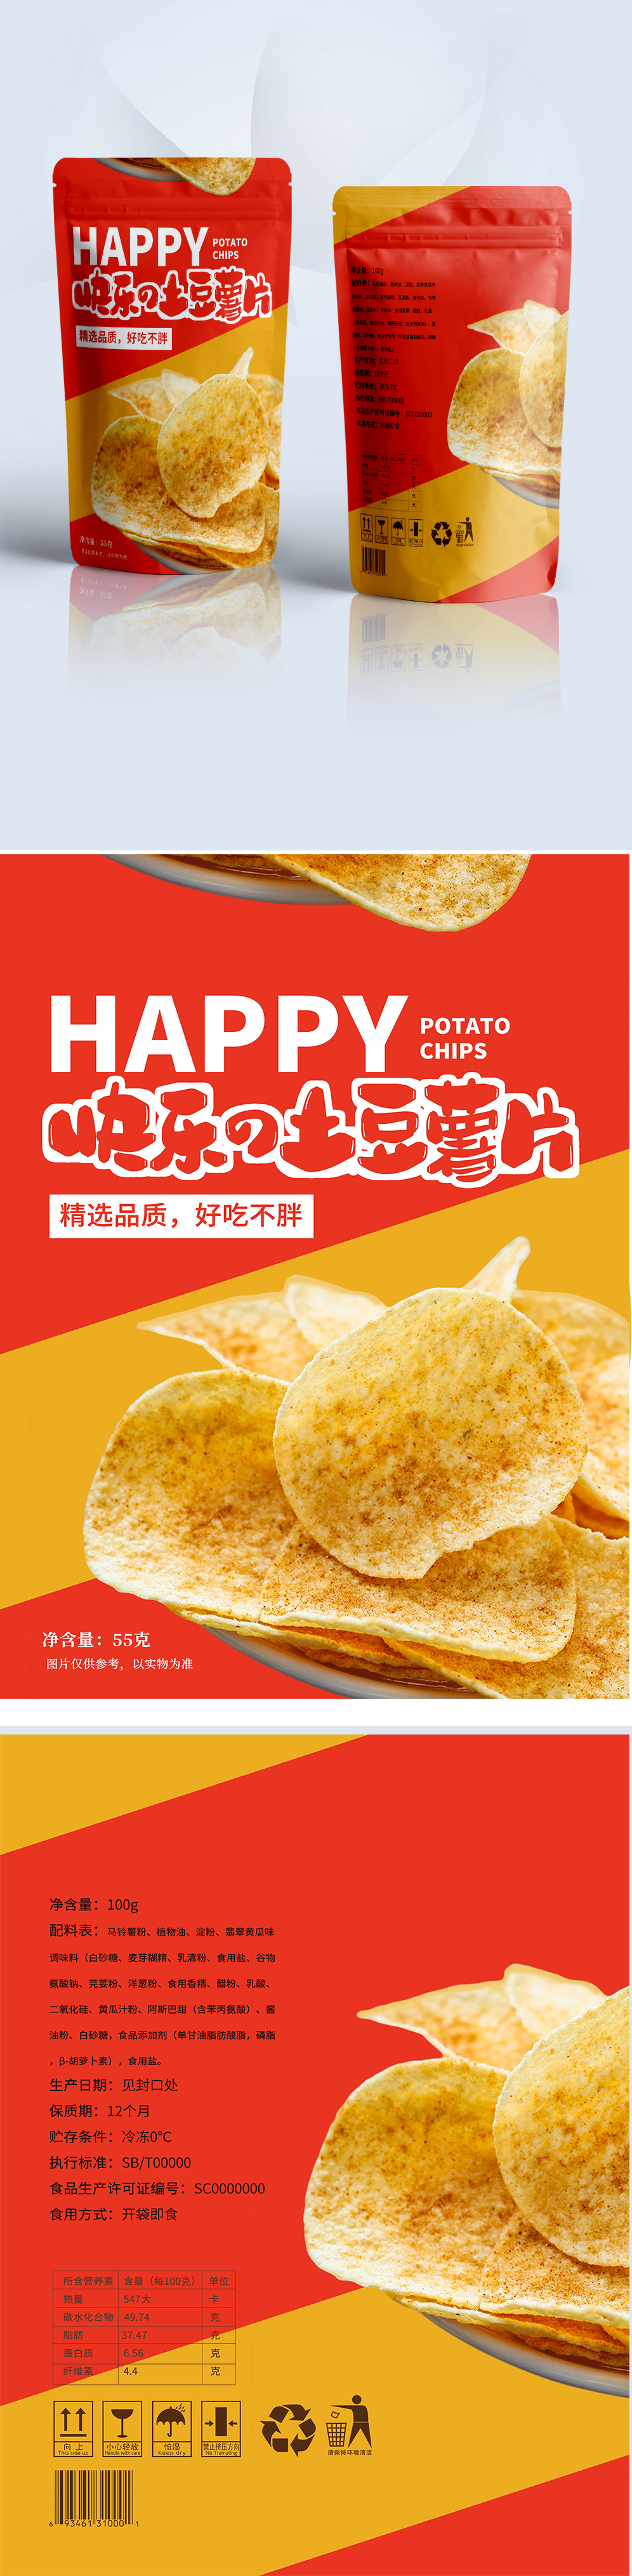 Download Potato Potato Chip Packaging Bag Design Template Image Picture Free Download 401577540 Lovepik Com Yellowimages Mockups